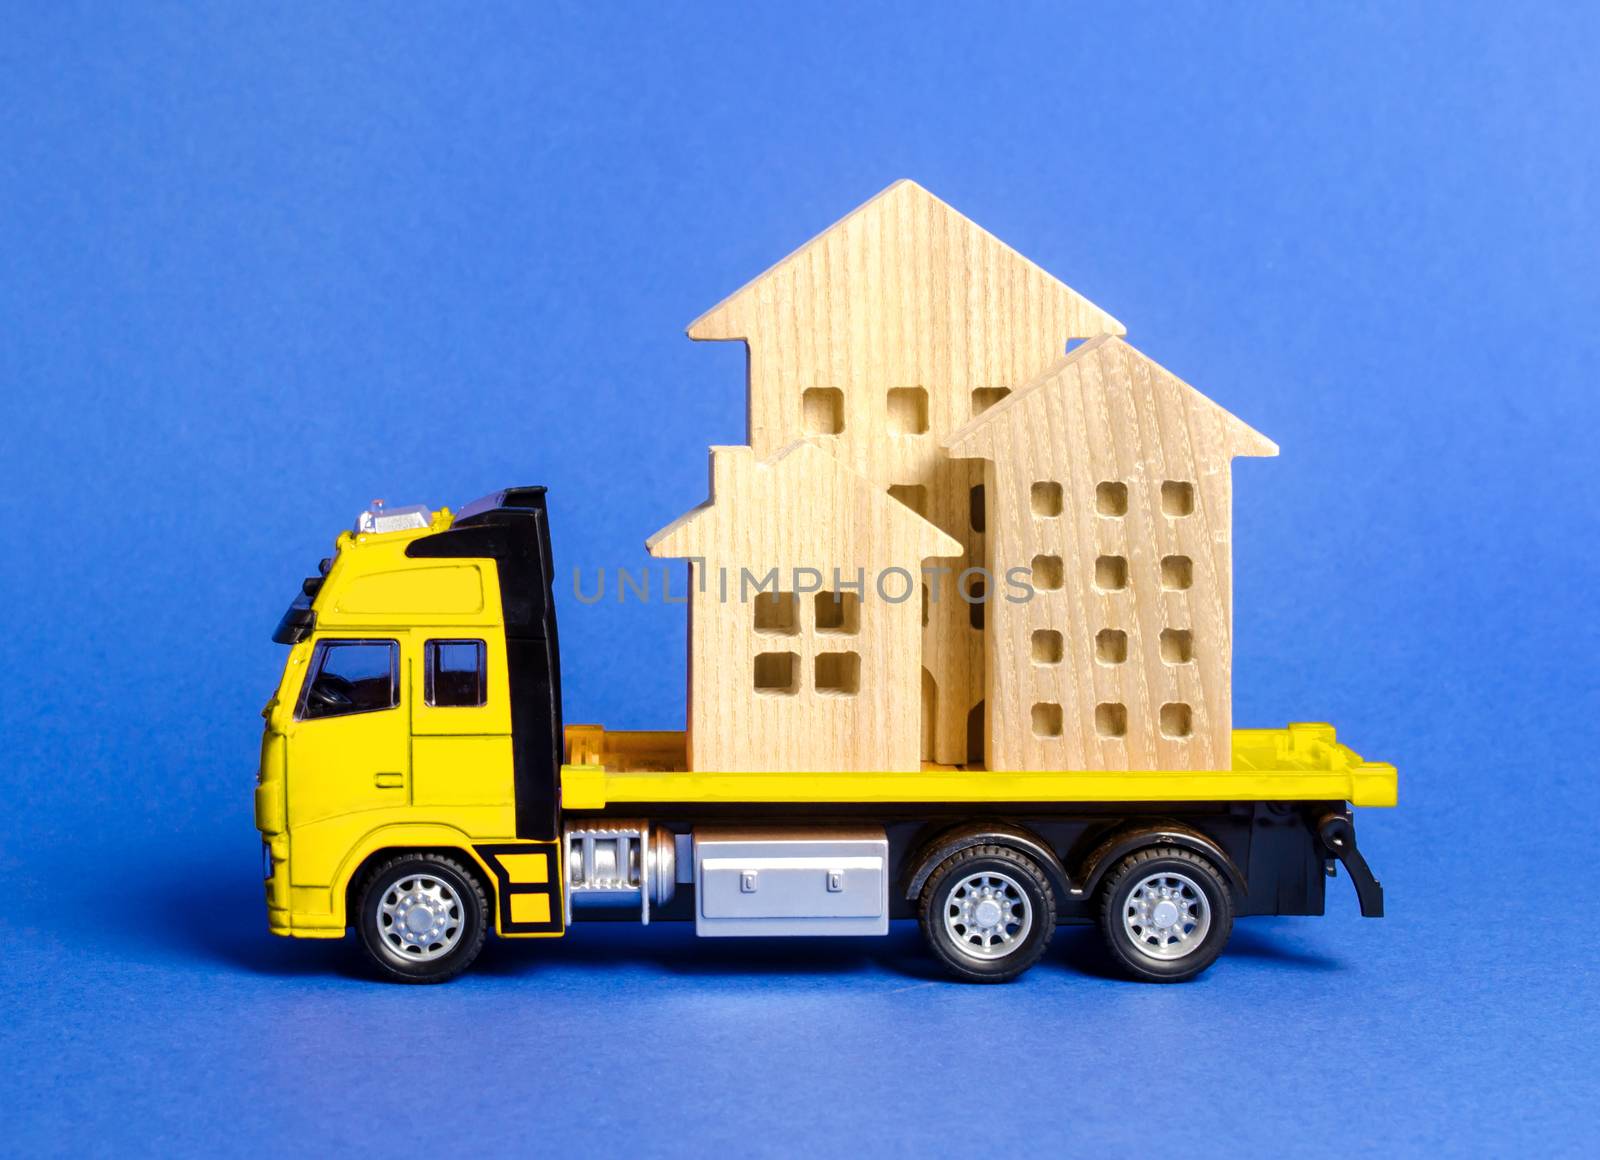 A cargo truck transports houses. Concept of transportation and cargo shipping, moving company. Construction of new houses and objects. Logistics and supply. Move entire buildings